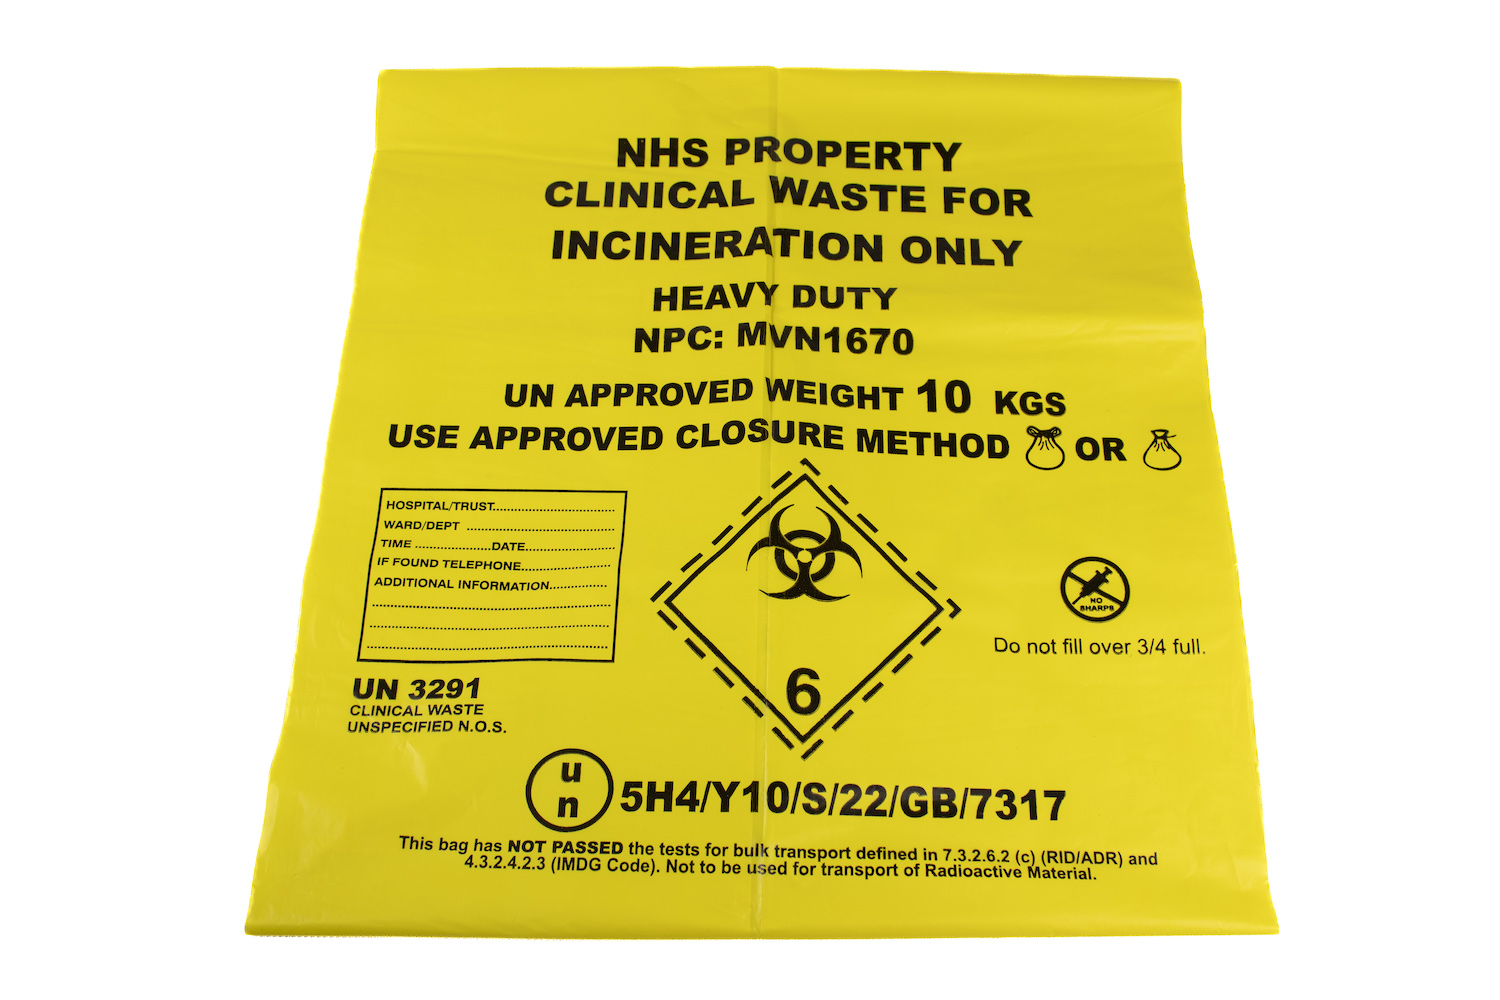 PENTAMED BiohazardBioMedical Waste Poly Bag  YELLOW Color Clinical Bag   Non Chlorinated  Above 50 Microne